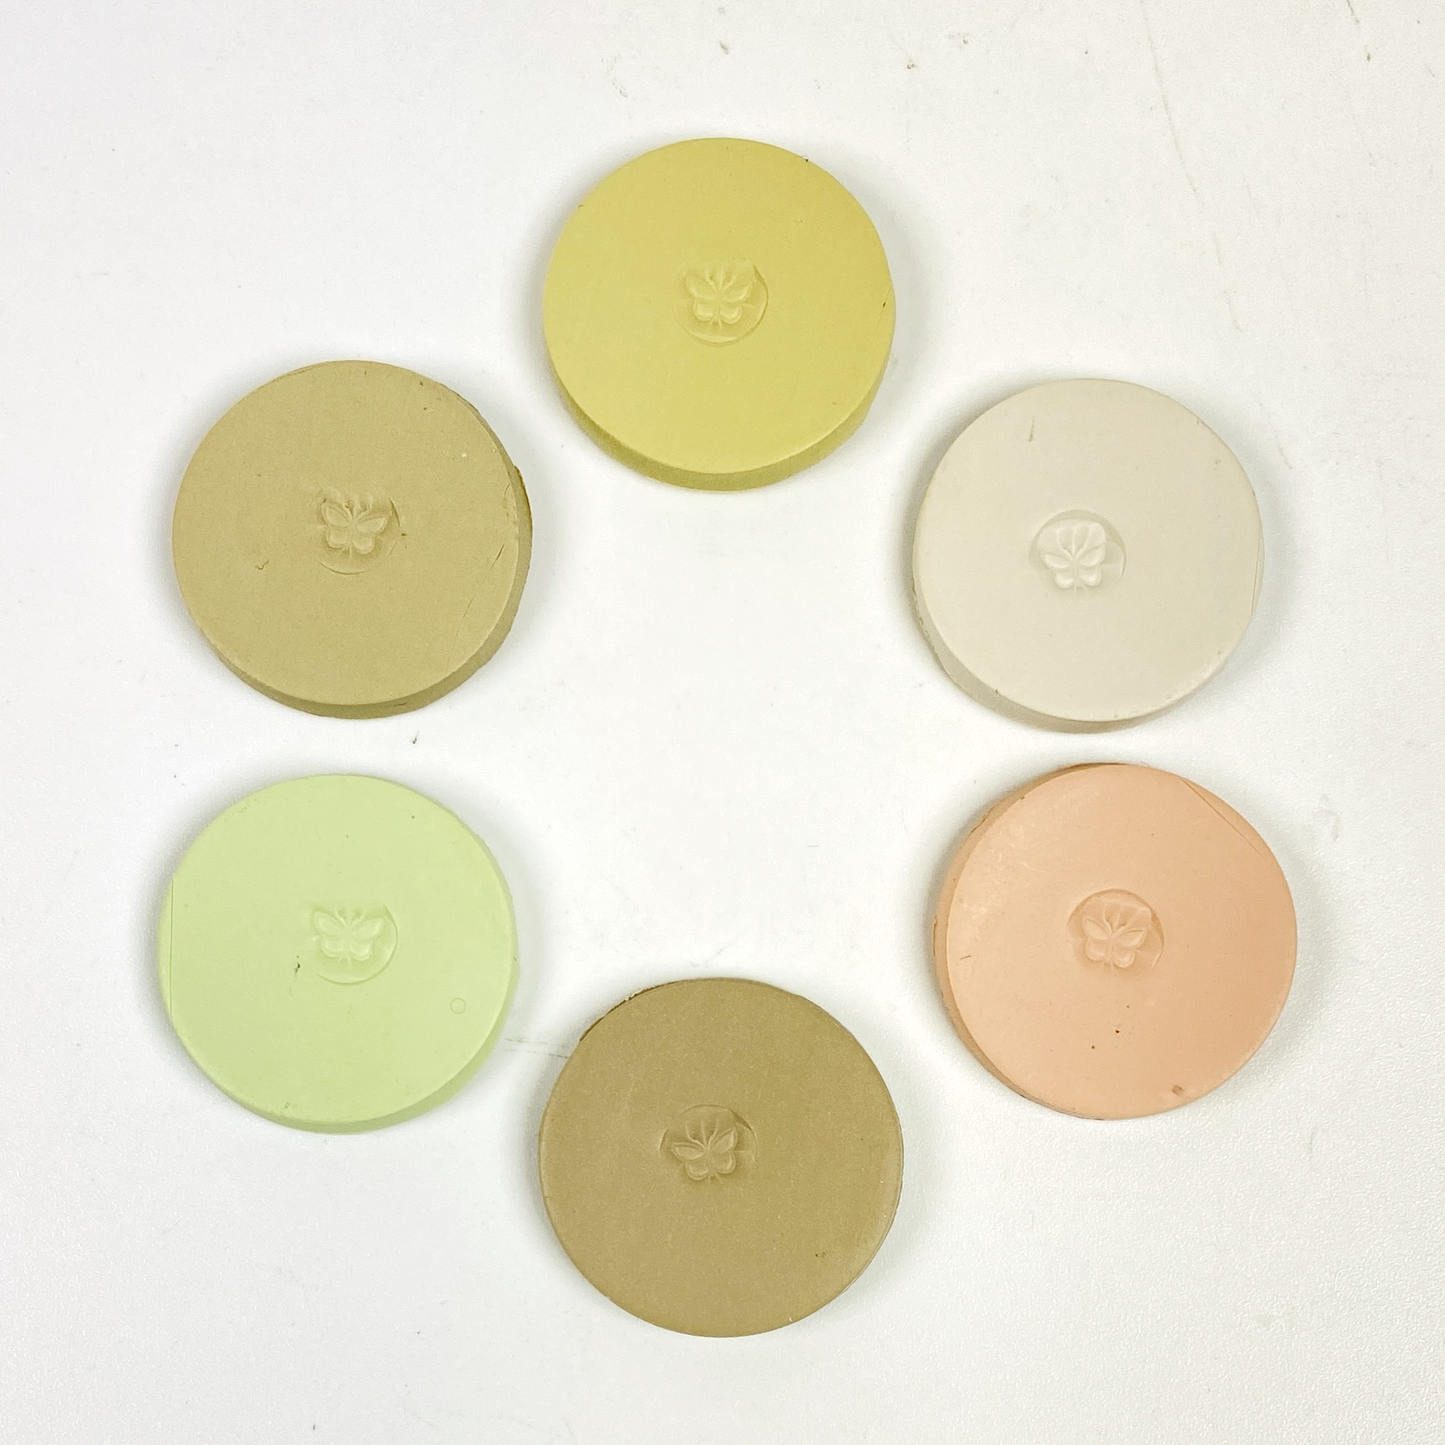 Discs of Polymer Clay in all 6 farmhouse colors of this palette, arranged in a ring.